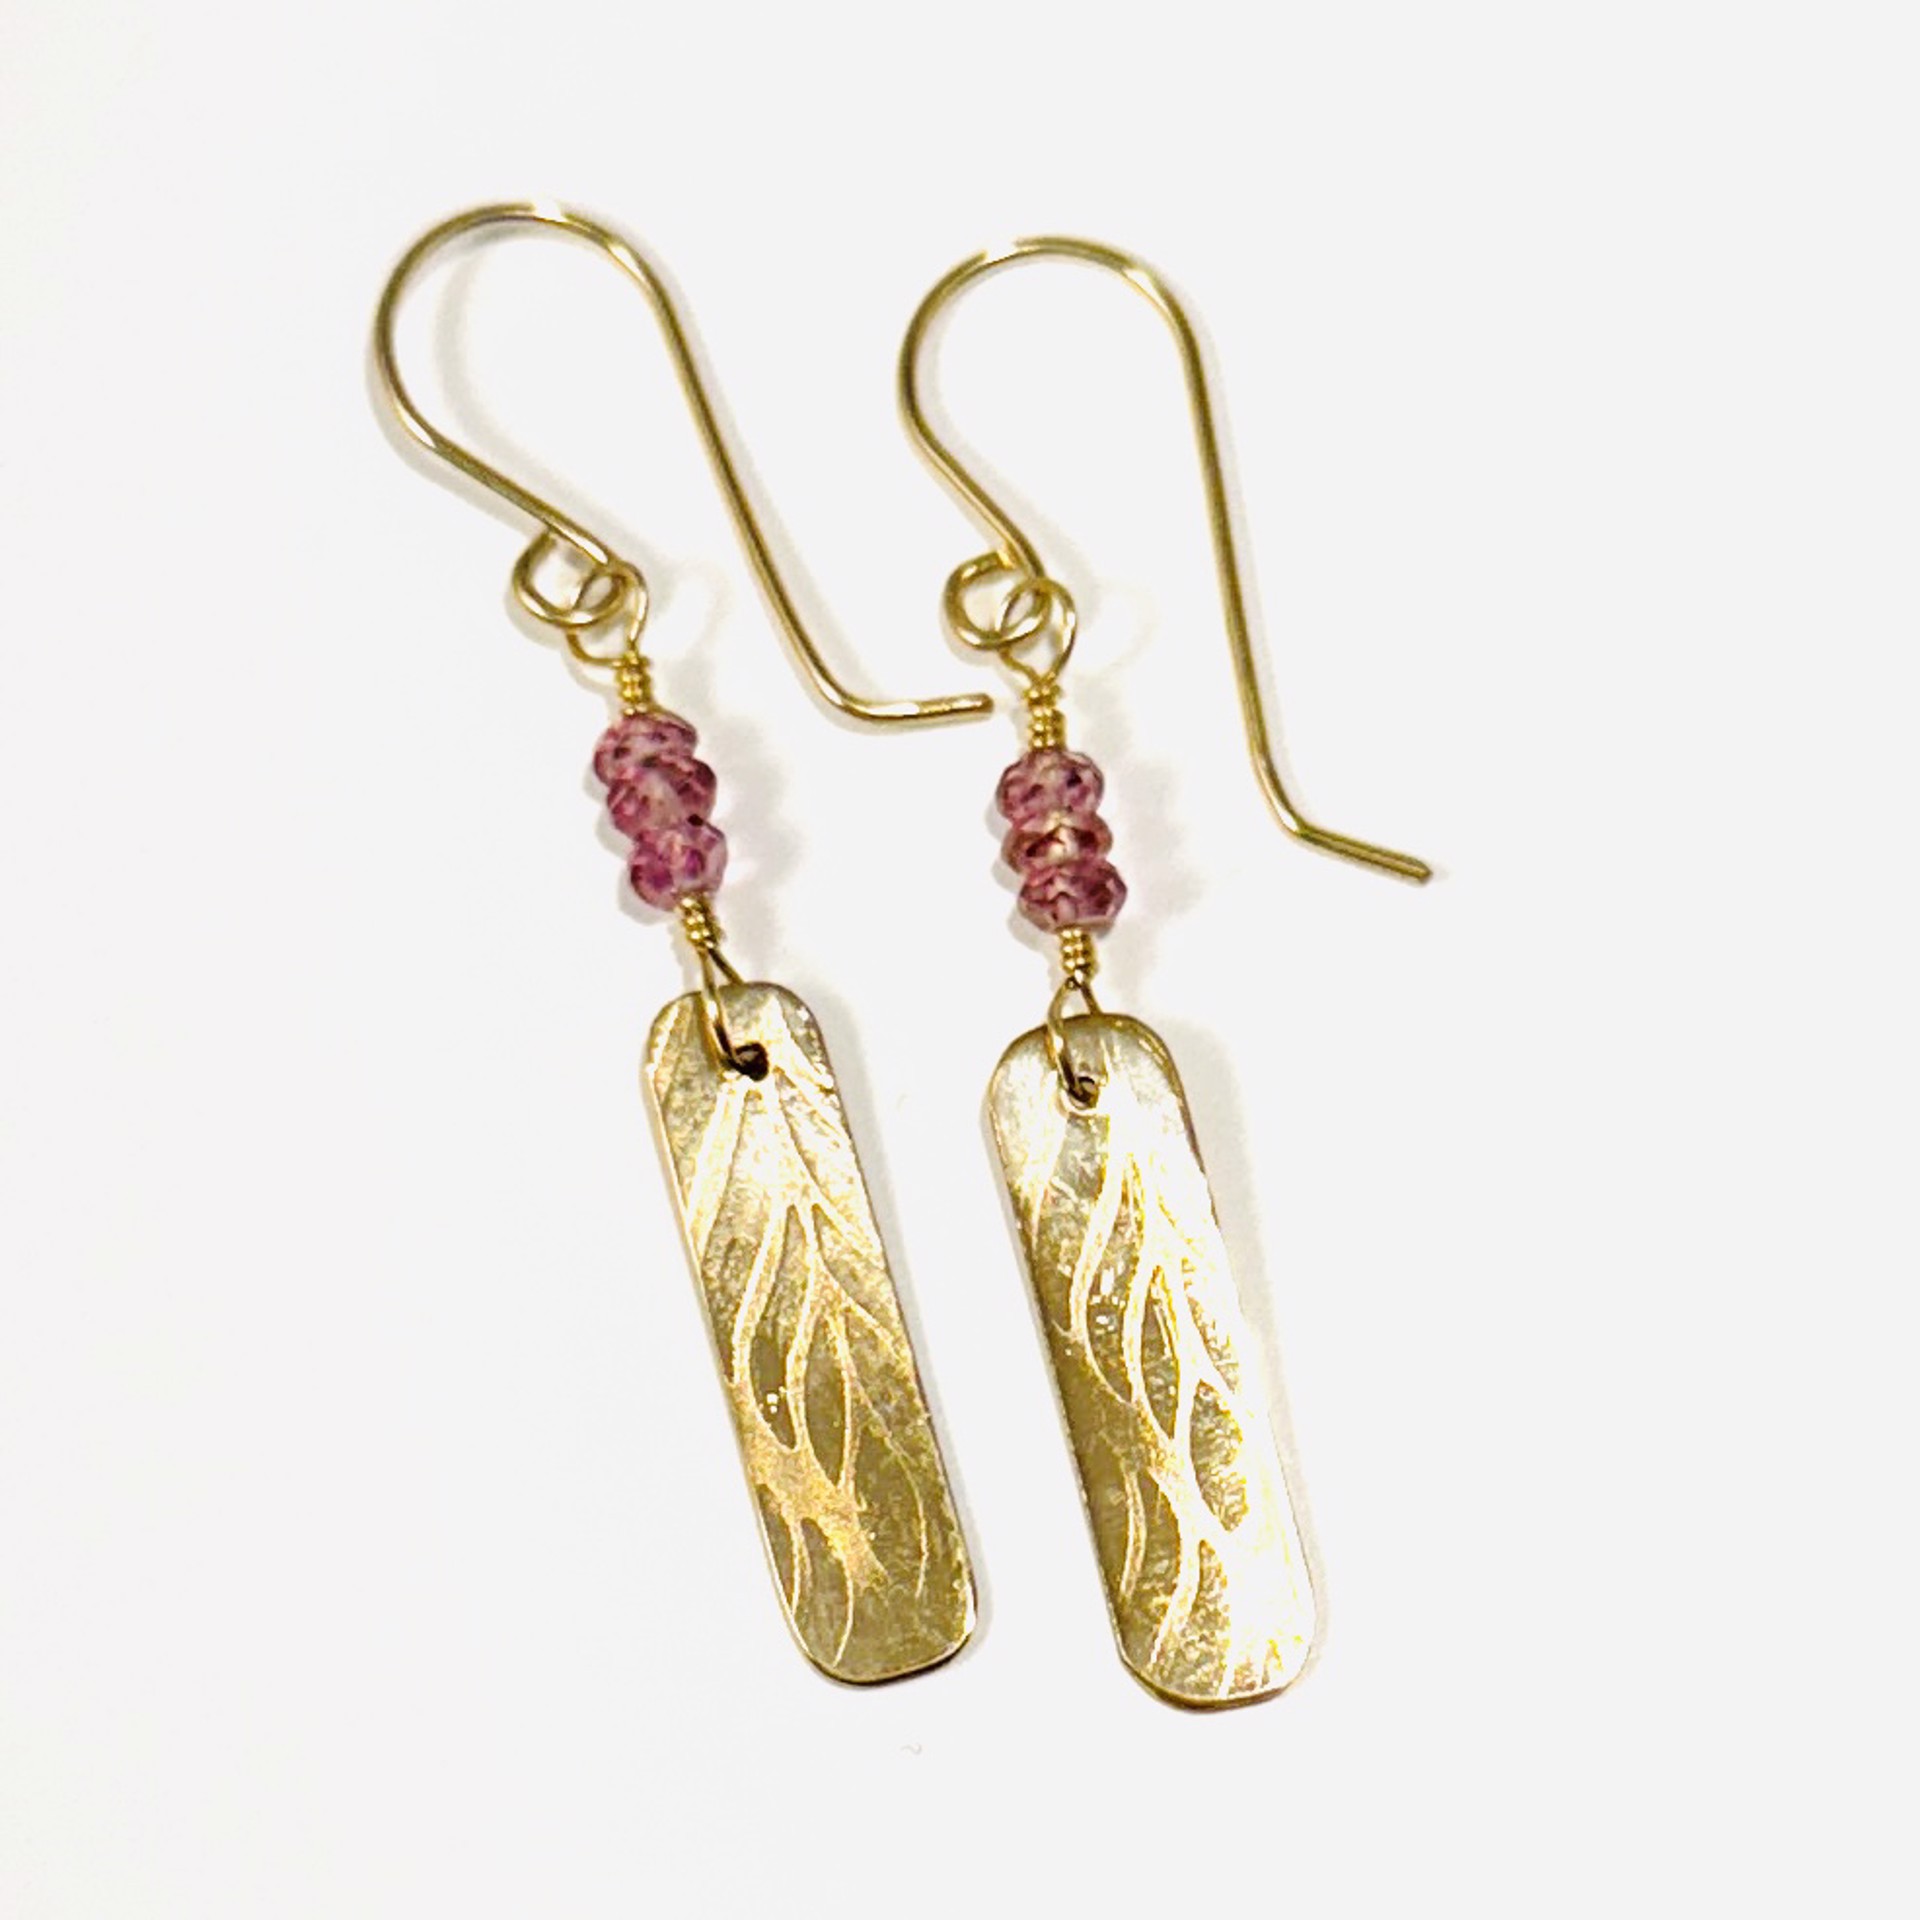 Pink Topaz Beads with 14Kgf Paddle Drop Earrings AB23-94 by Anne Bivens